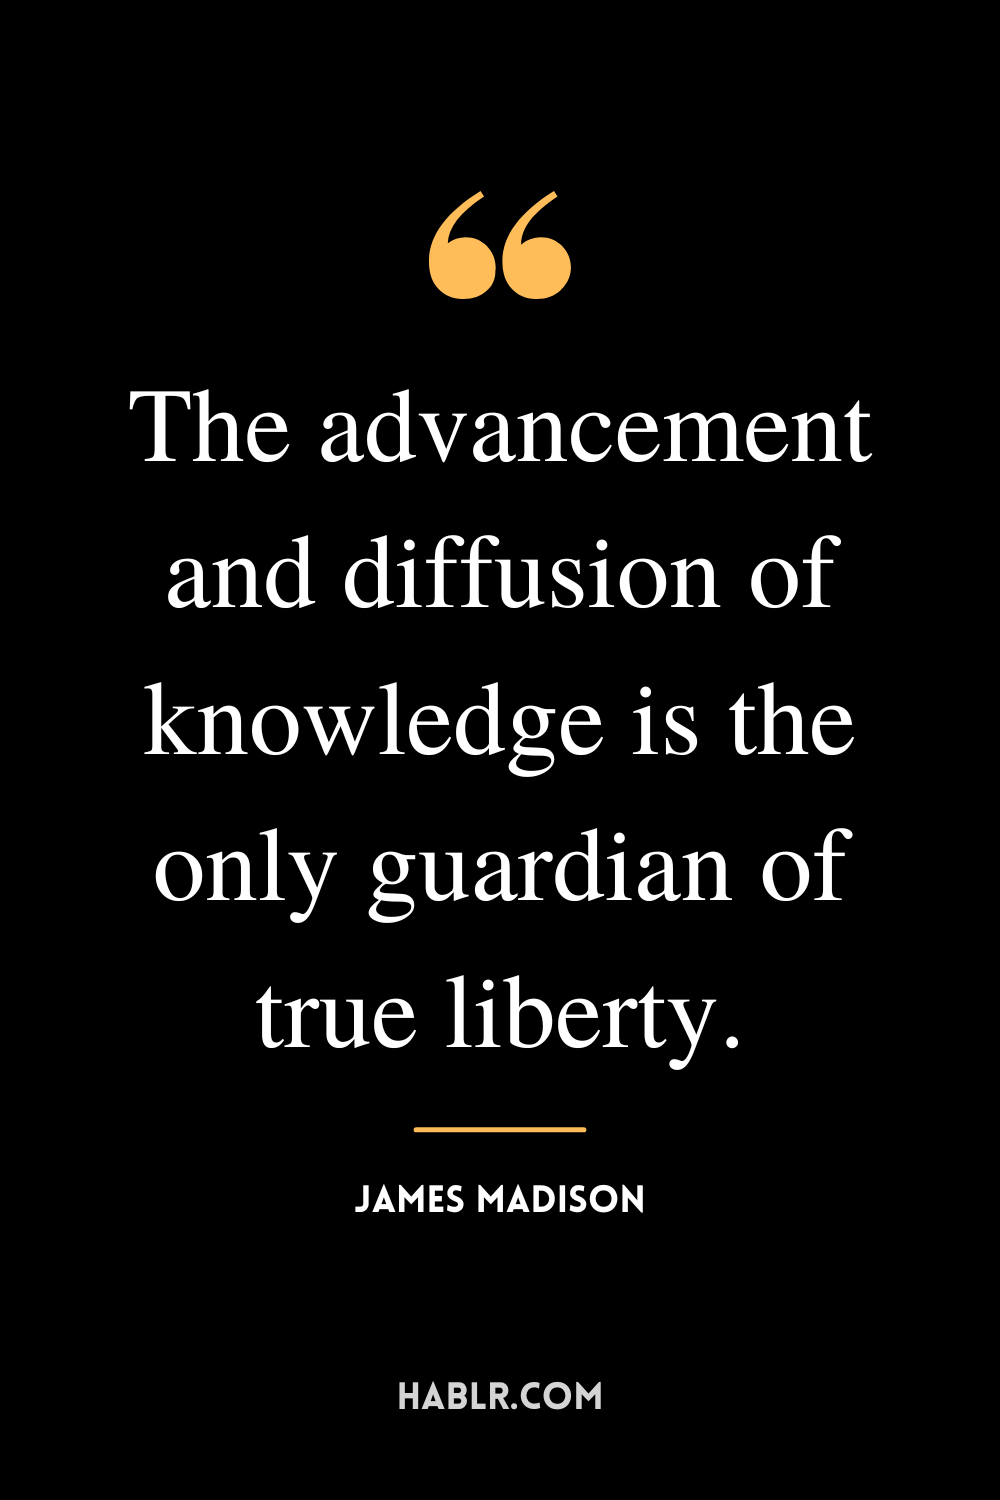 “The advancement and diffusion of knowledge is the only guardian of true liberty.” -James Madison